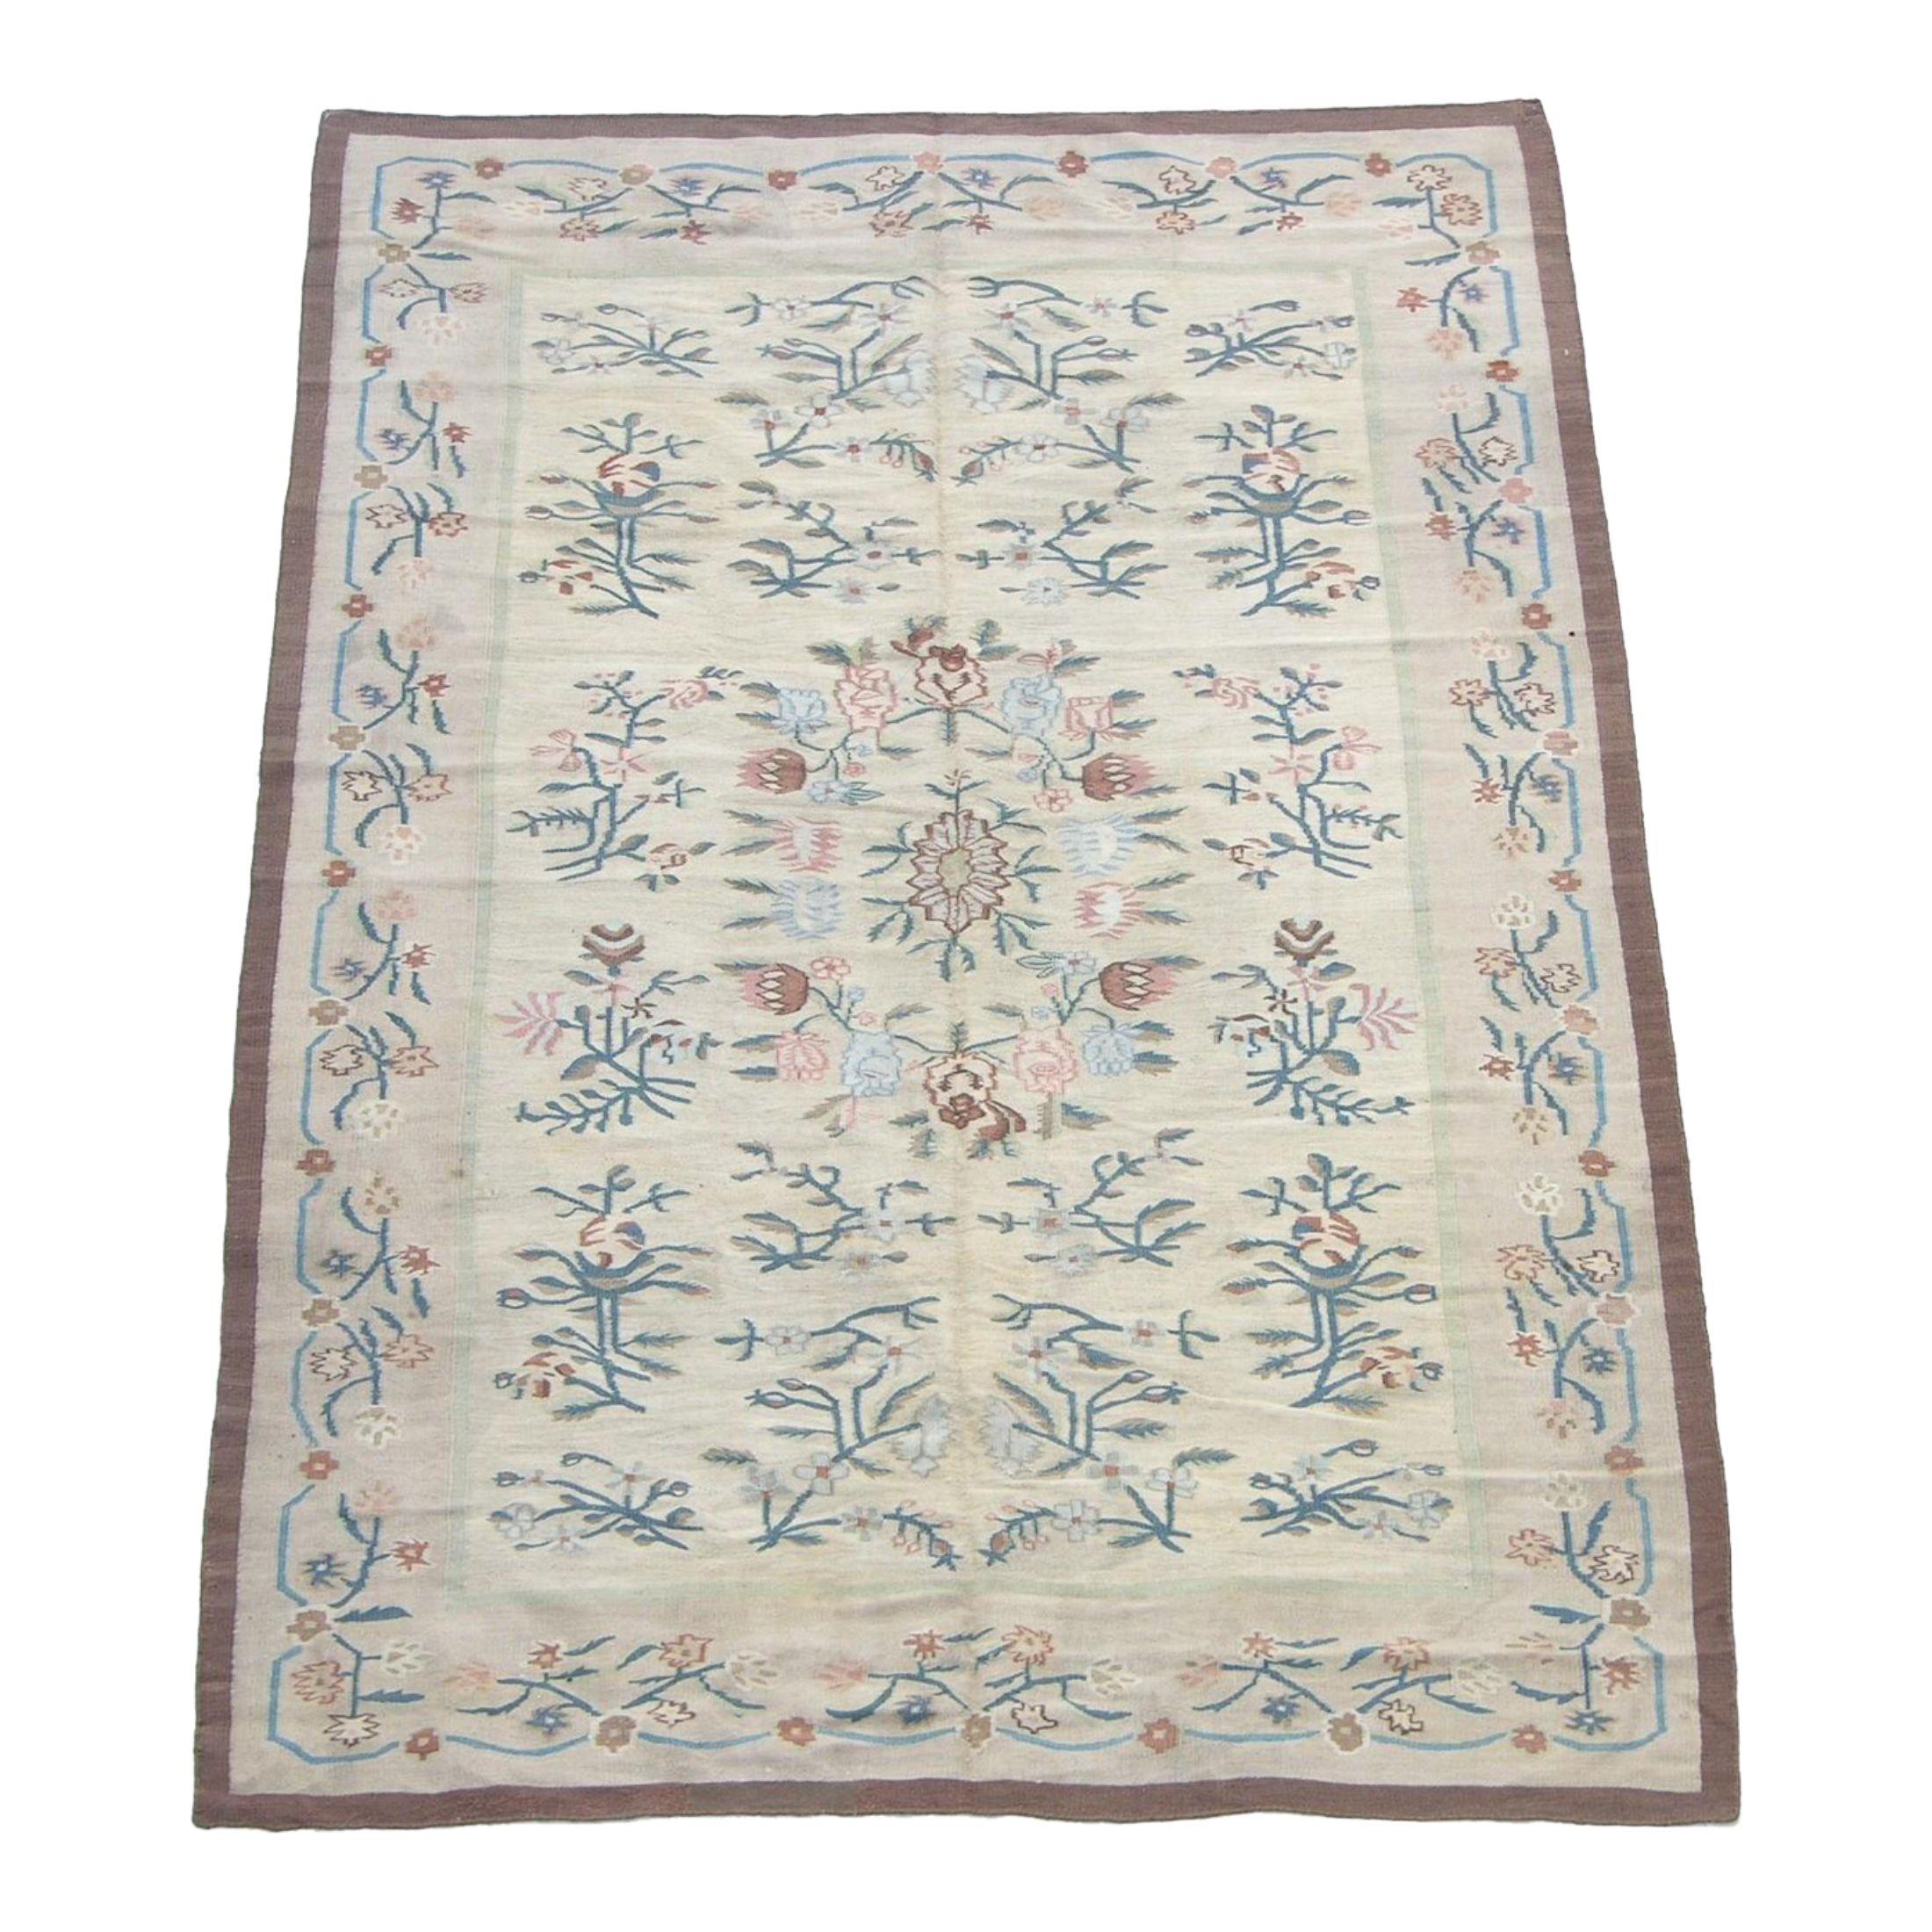 Early 20th Century Antique Floral Bessarabian Kilim Rug For Sale